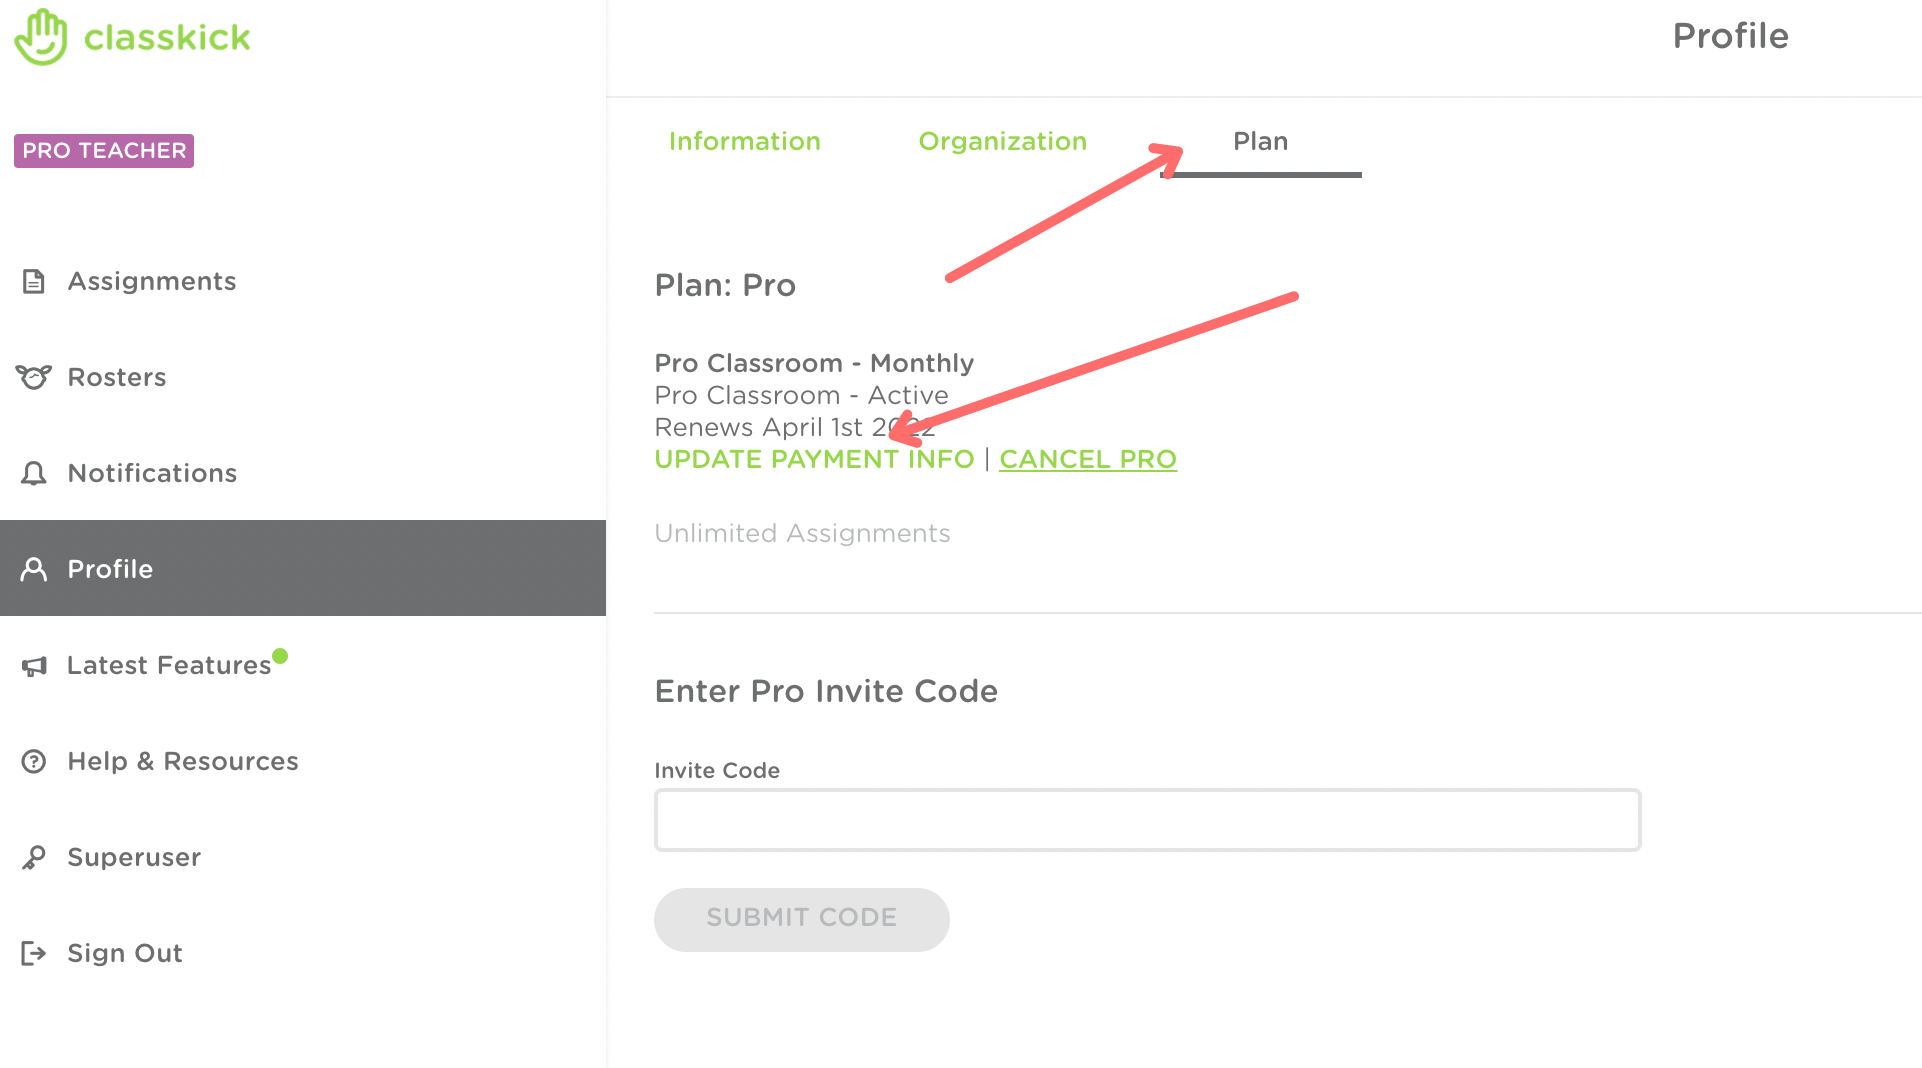 A red arrow points to Plan, underlined in gray, at the top of the page. Another red arrow points to update payment info within the page.